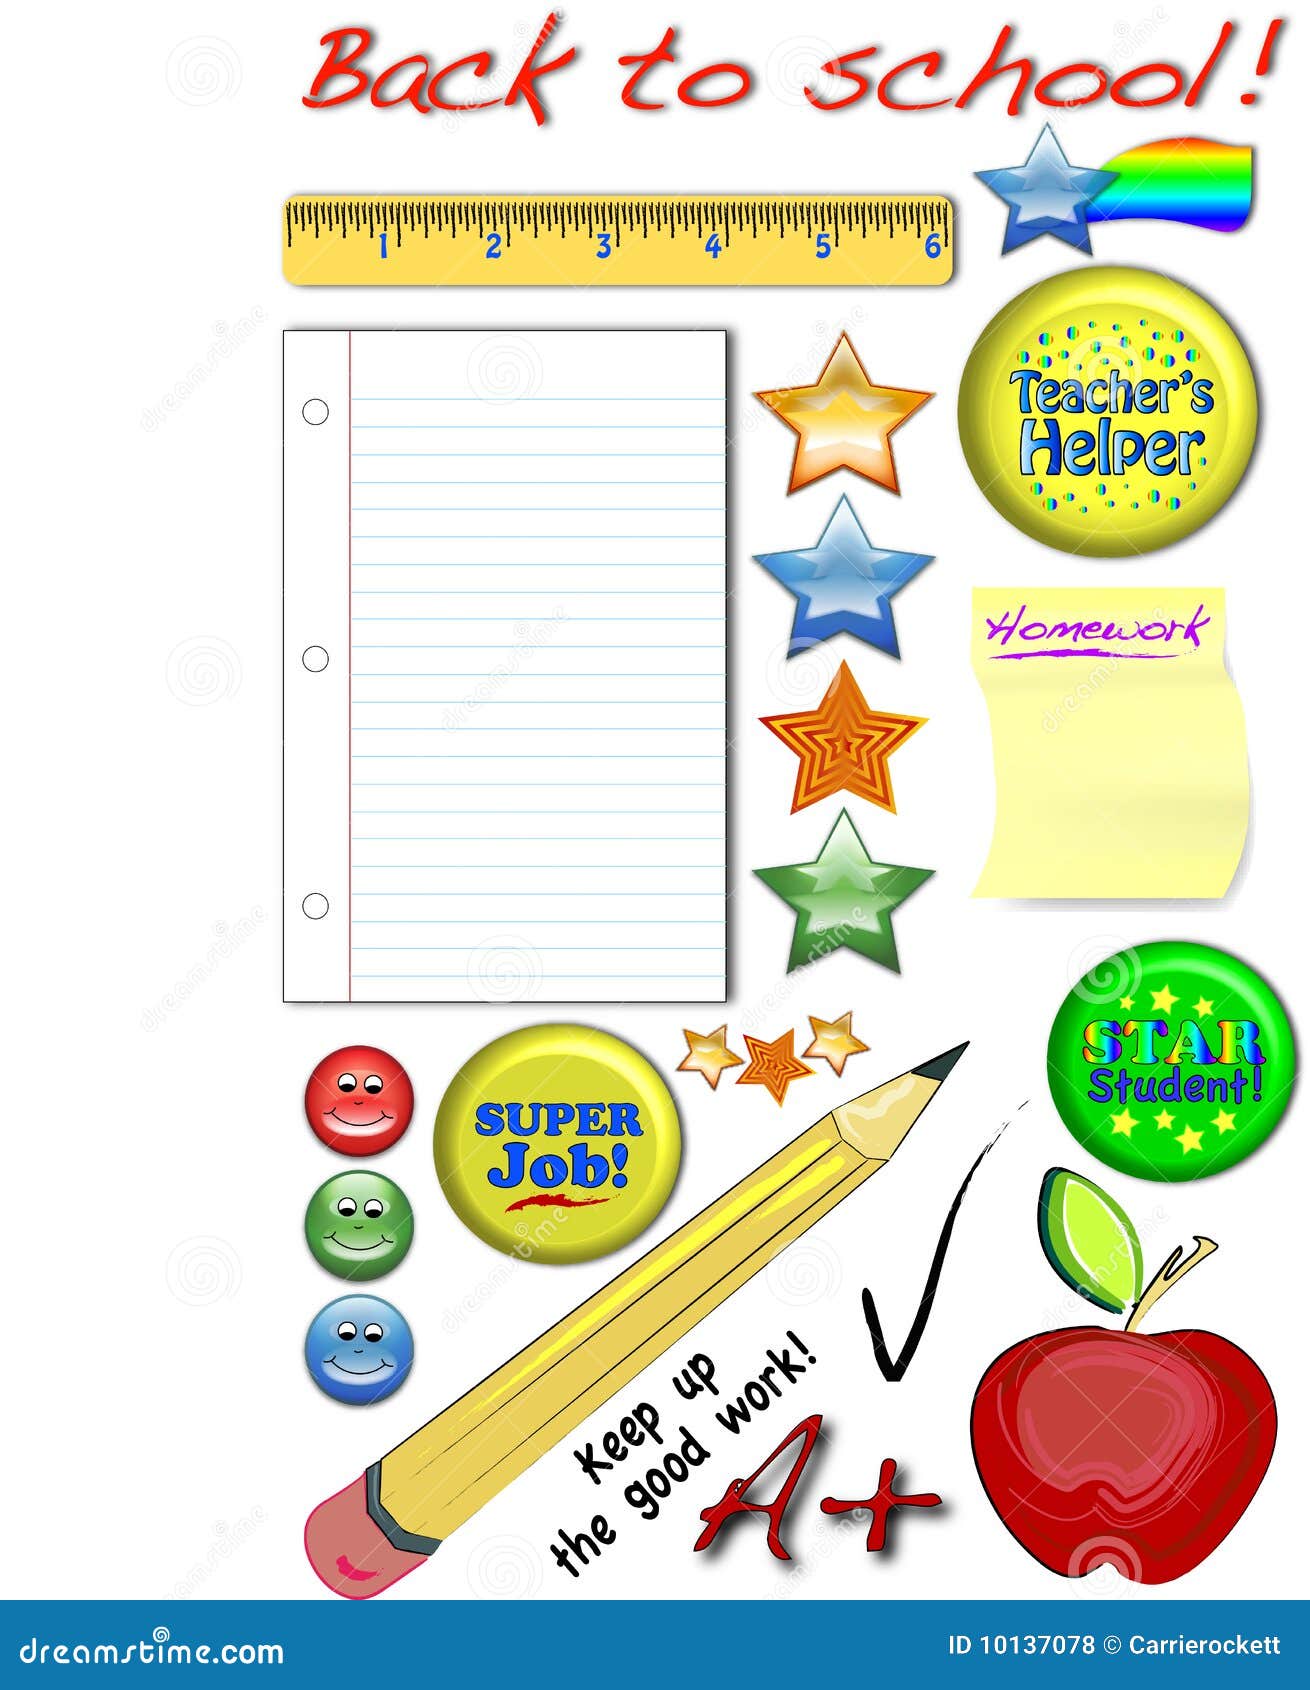 back to school pictures clip art - photo #46